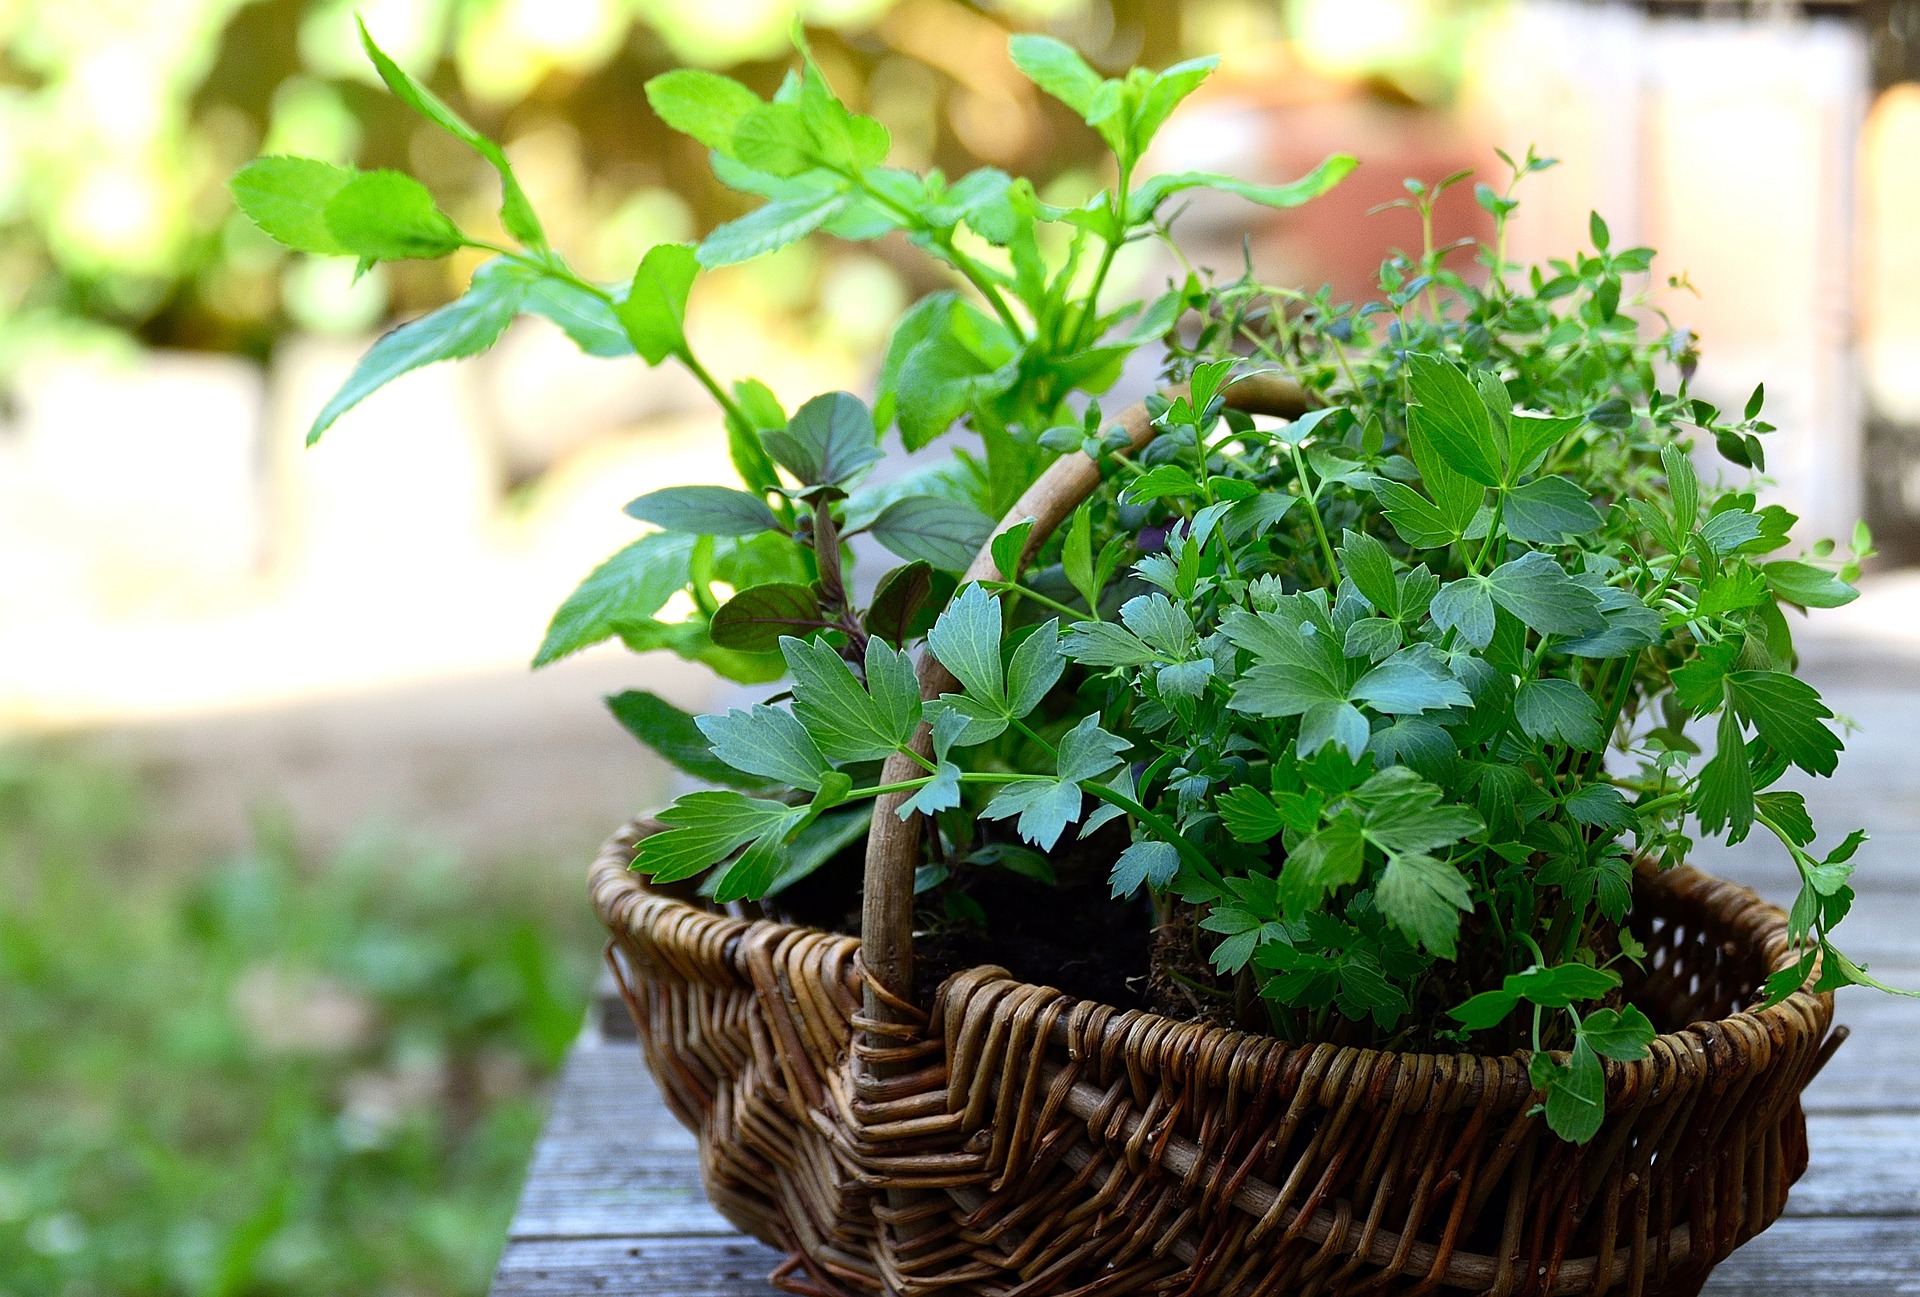 Cultural Encounter: Garden, Cook, and Create with Herbs